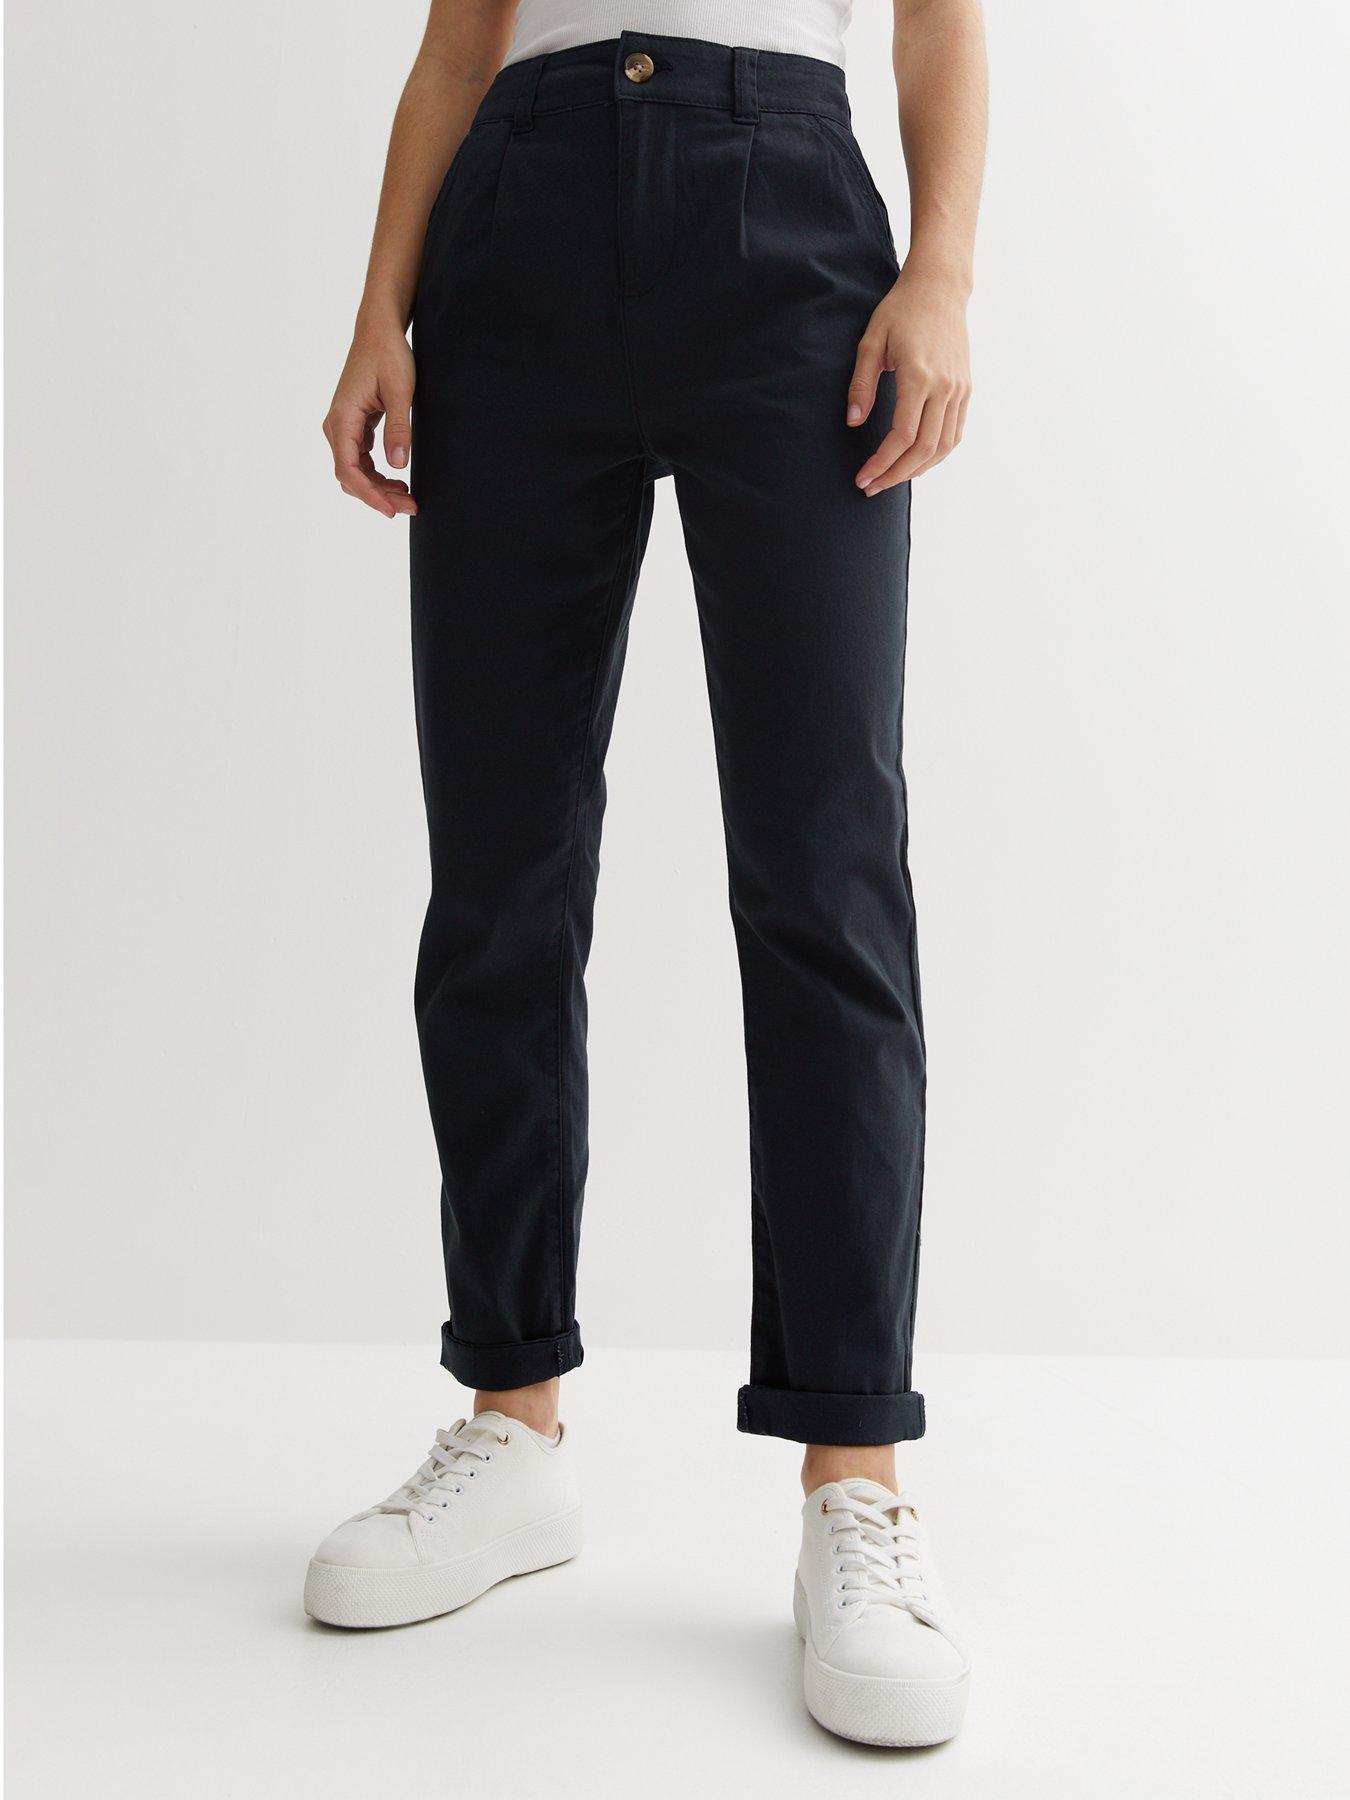 New Look Navy Mid Rise Straight Leg Chinos | Very.co.uk